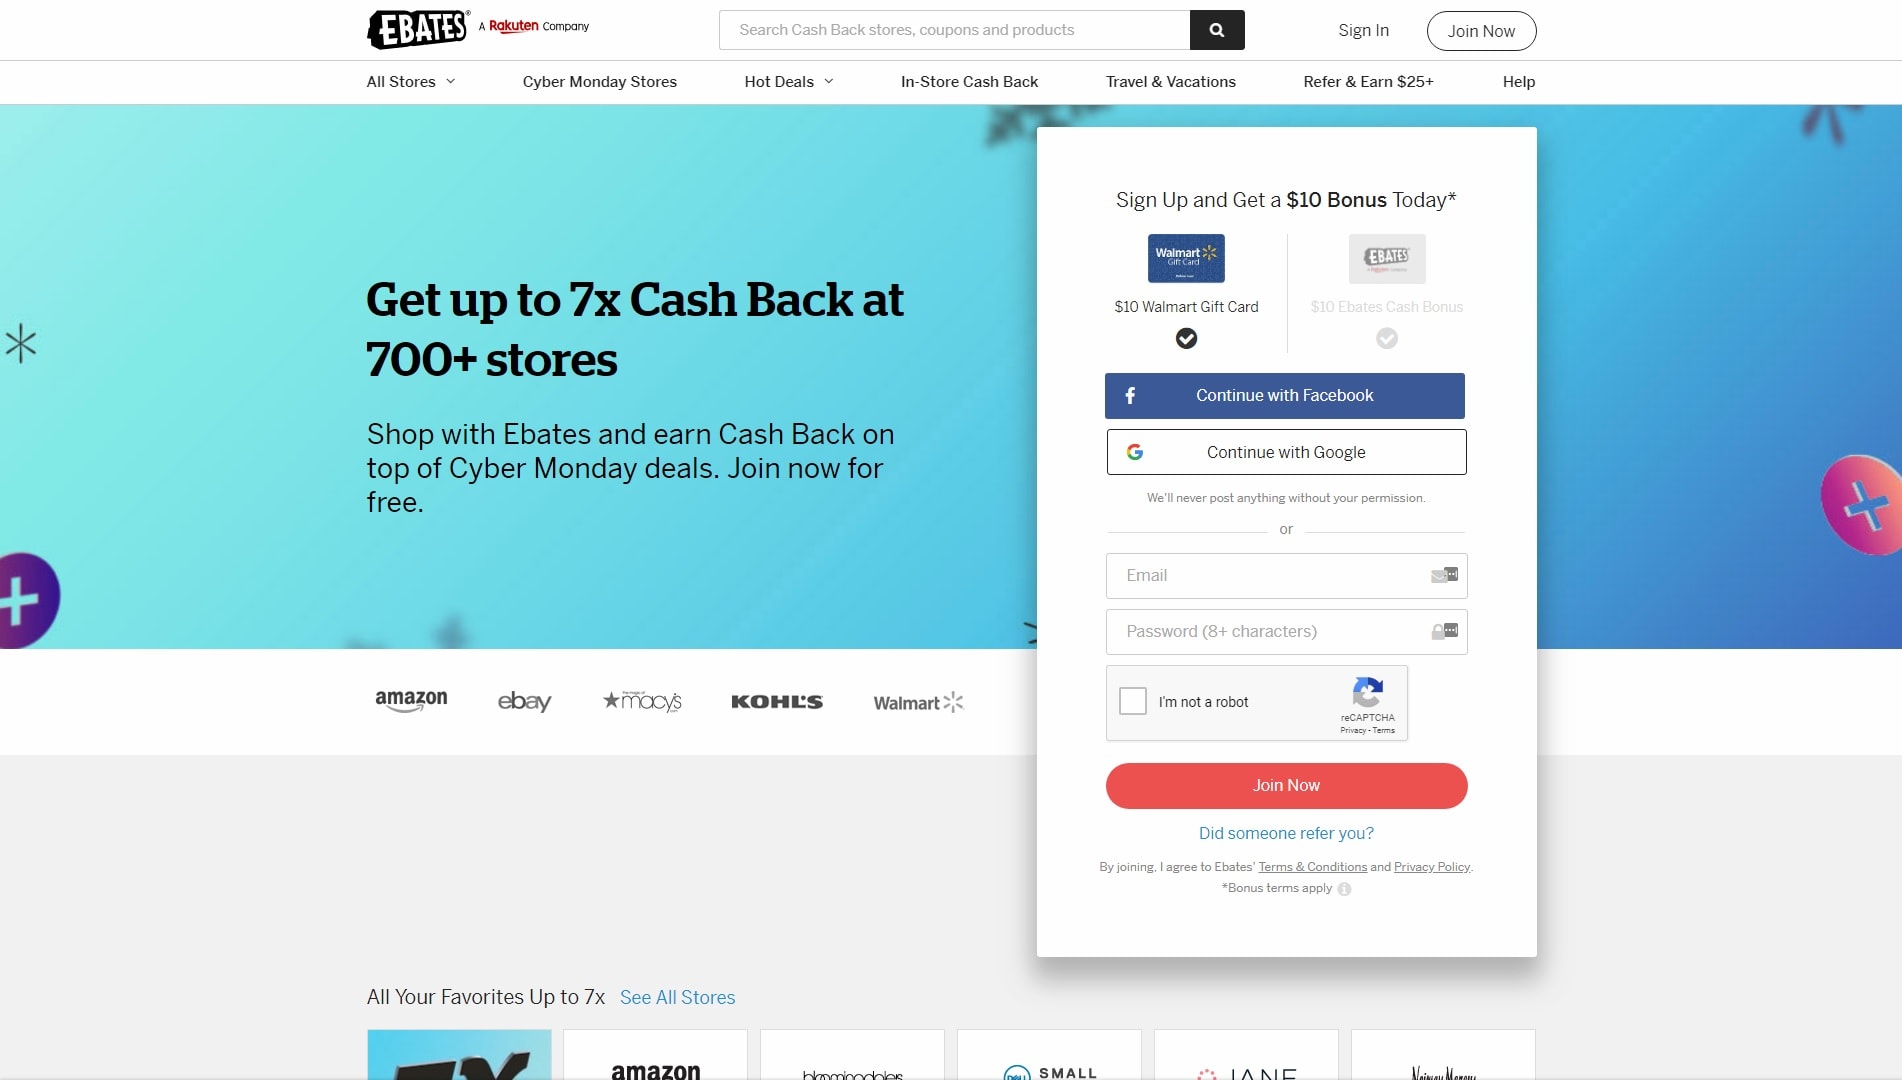 Ebates Review – Should You Use It? (Updated for 2019)